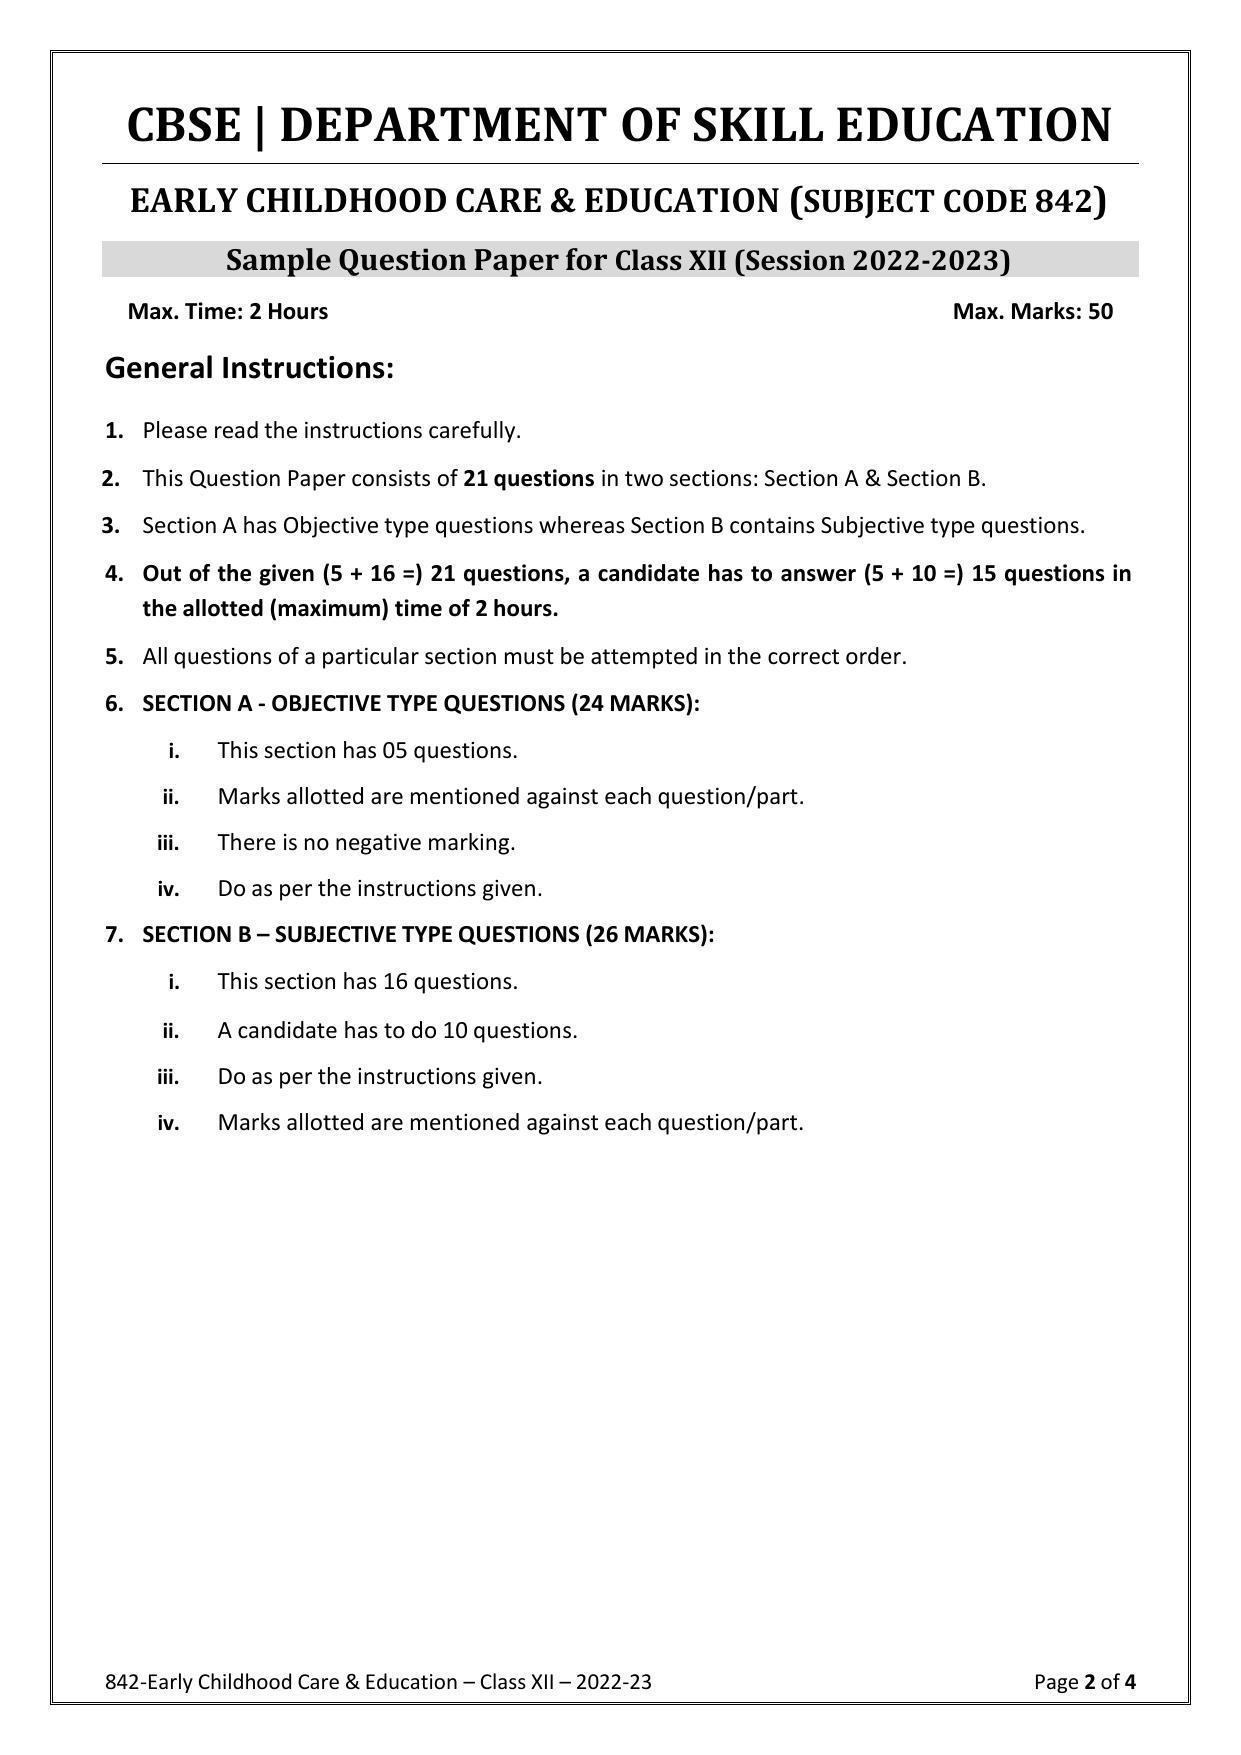 CBSE Class 12 Early Childhood Care & Education (Skill Education) Sample Papers 2023 - Page 2